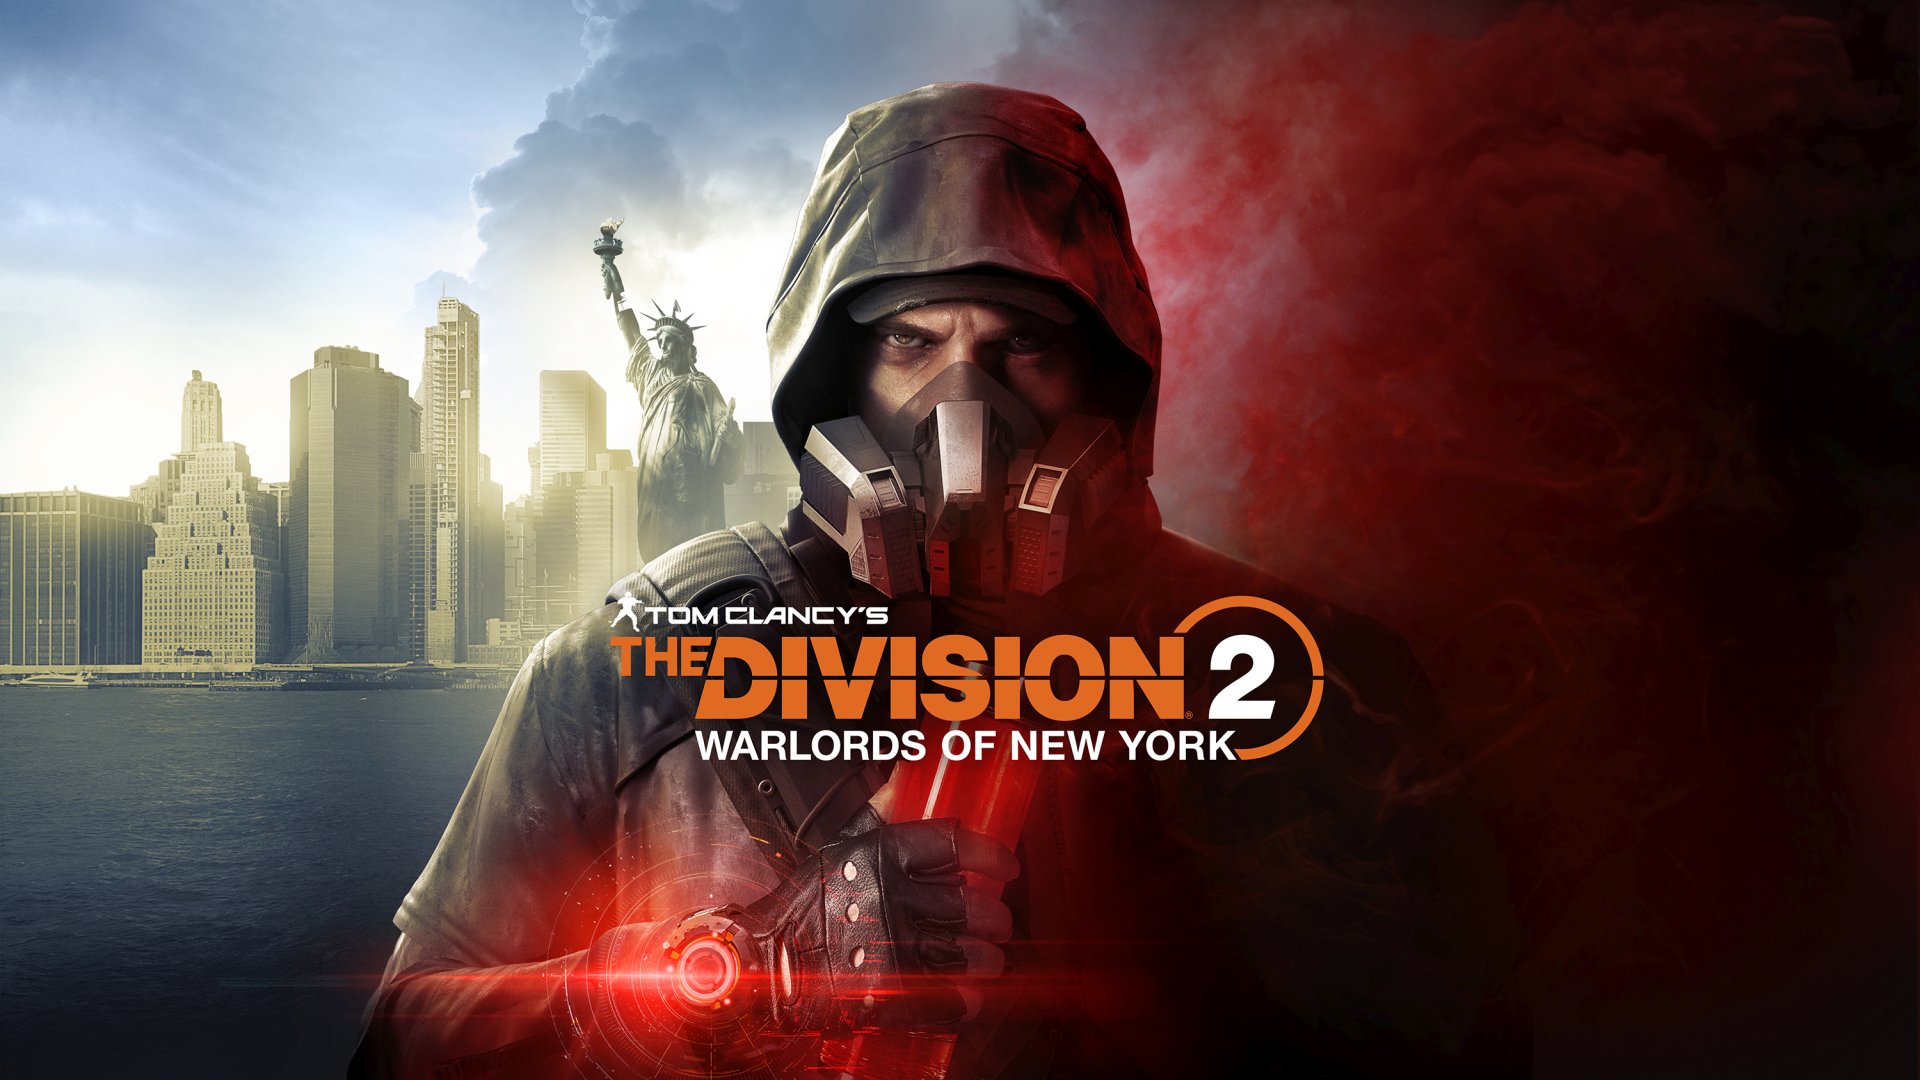 Tom Clancys The Division 2 Wallpapers   PlayStation Universe 1920x1080